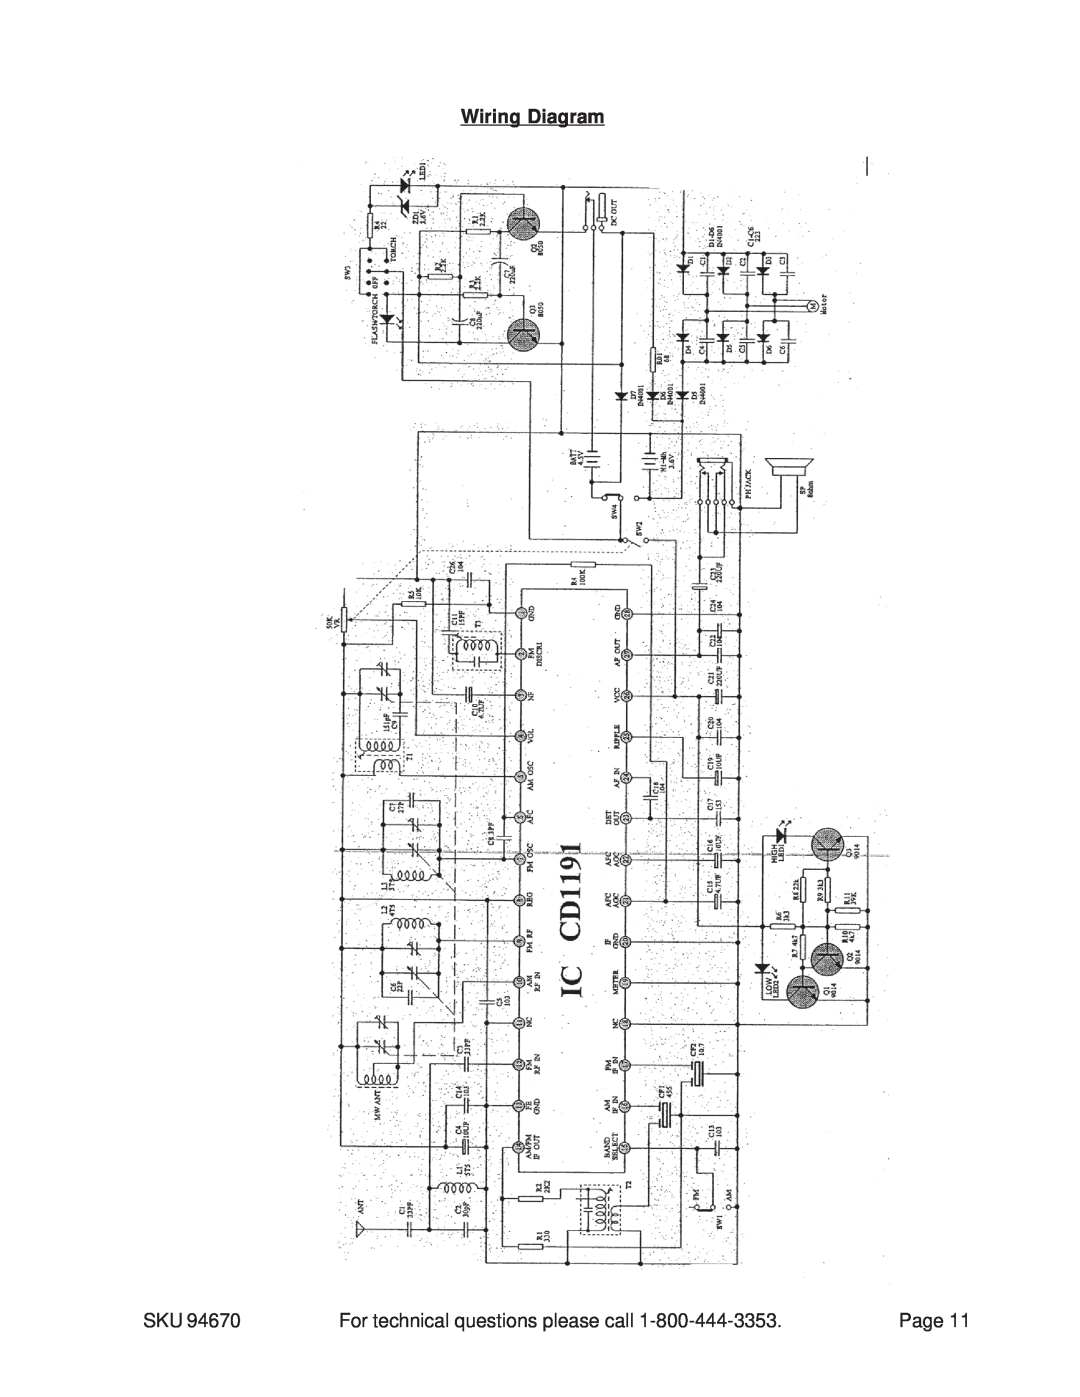 Harbor Freight Tools 94670 manual Wiring Diagram, For technical questions please call, Page 